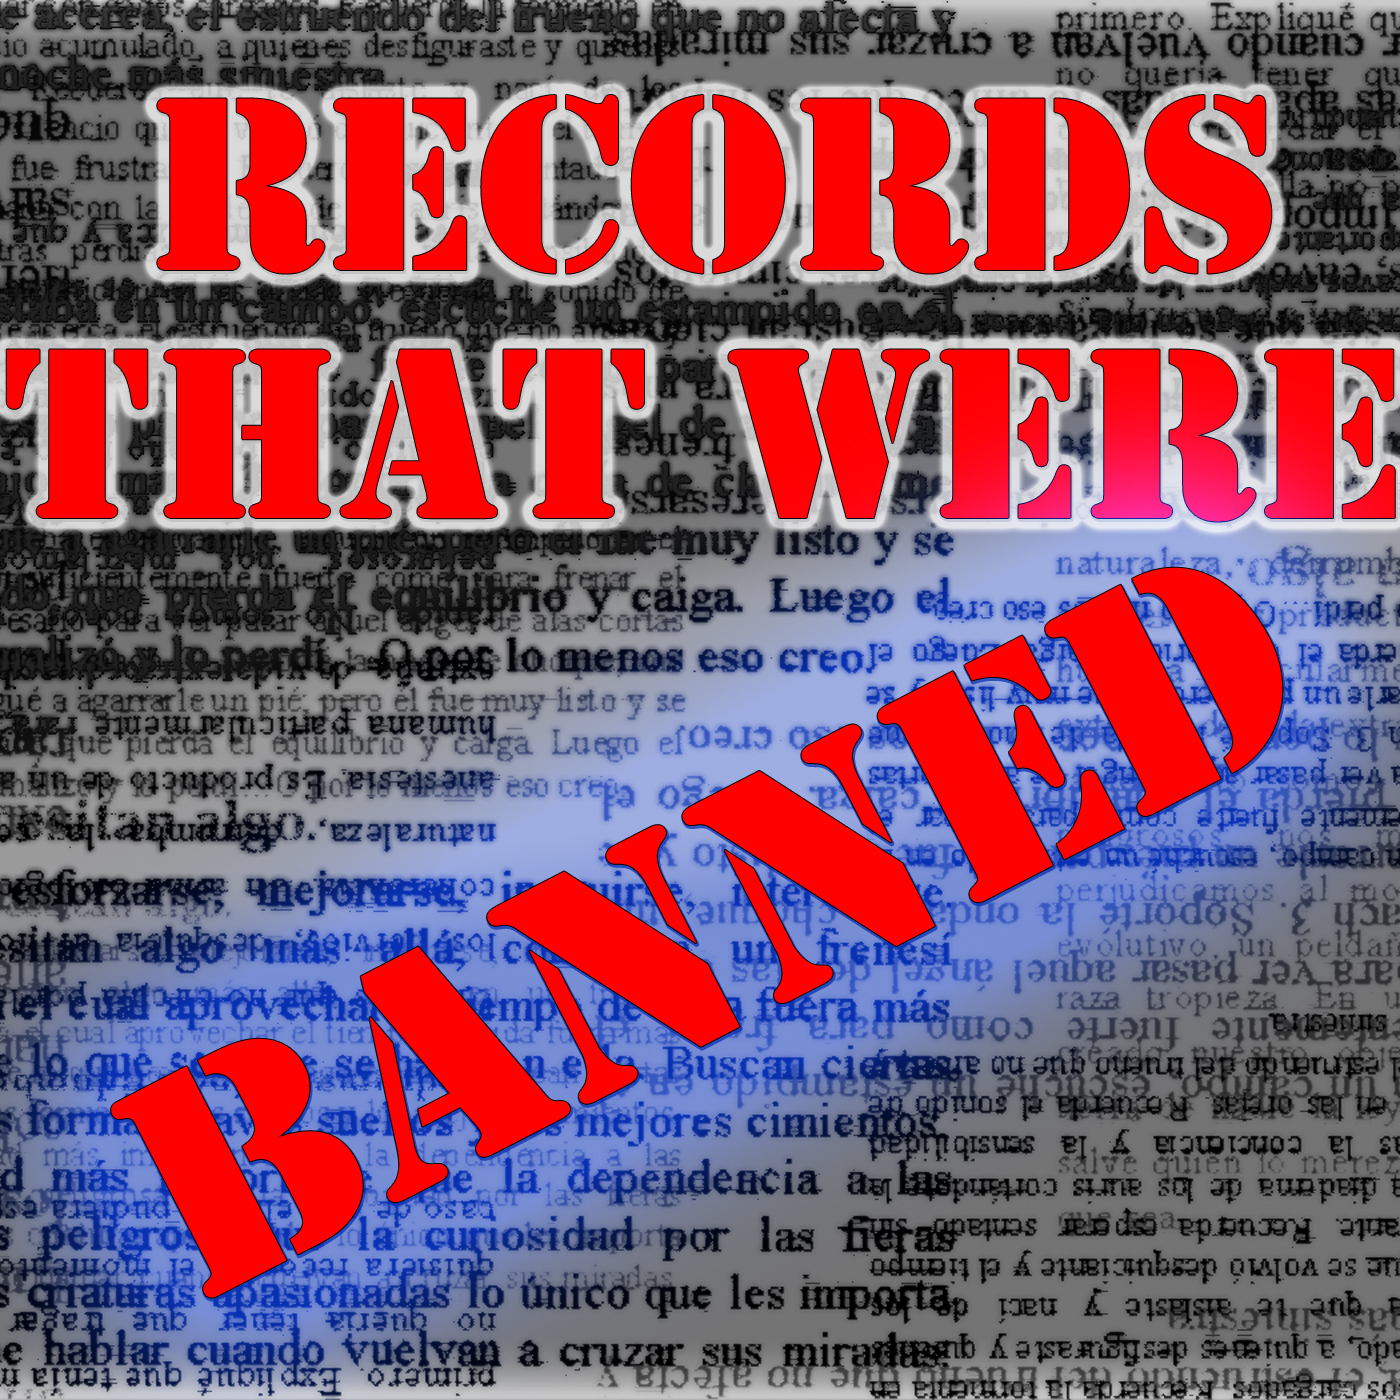 Records That Were Banned